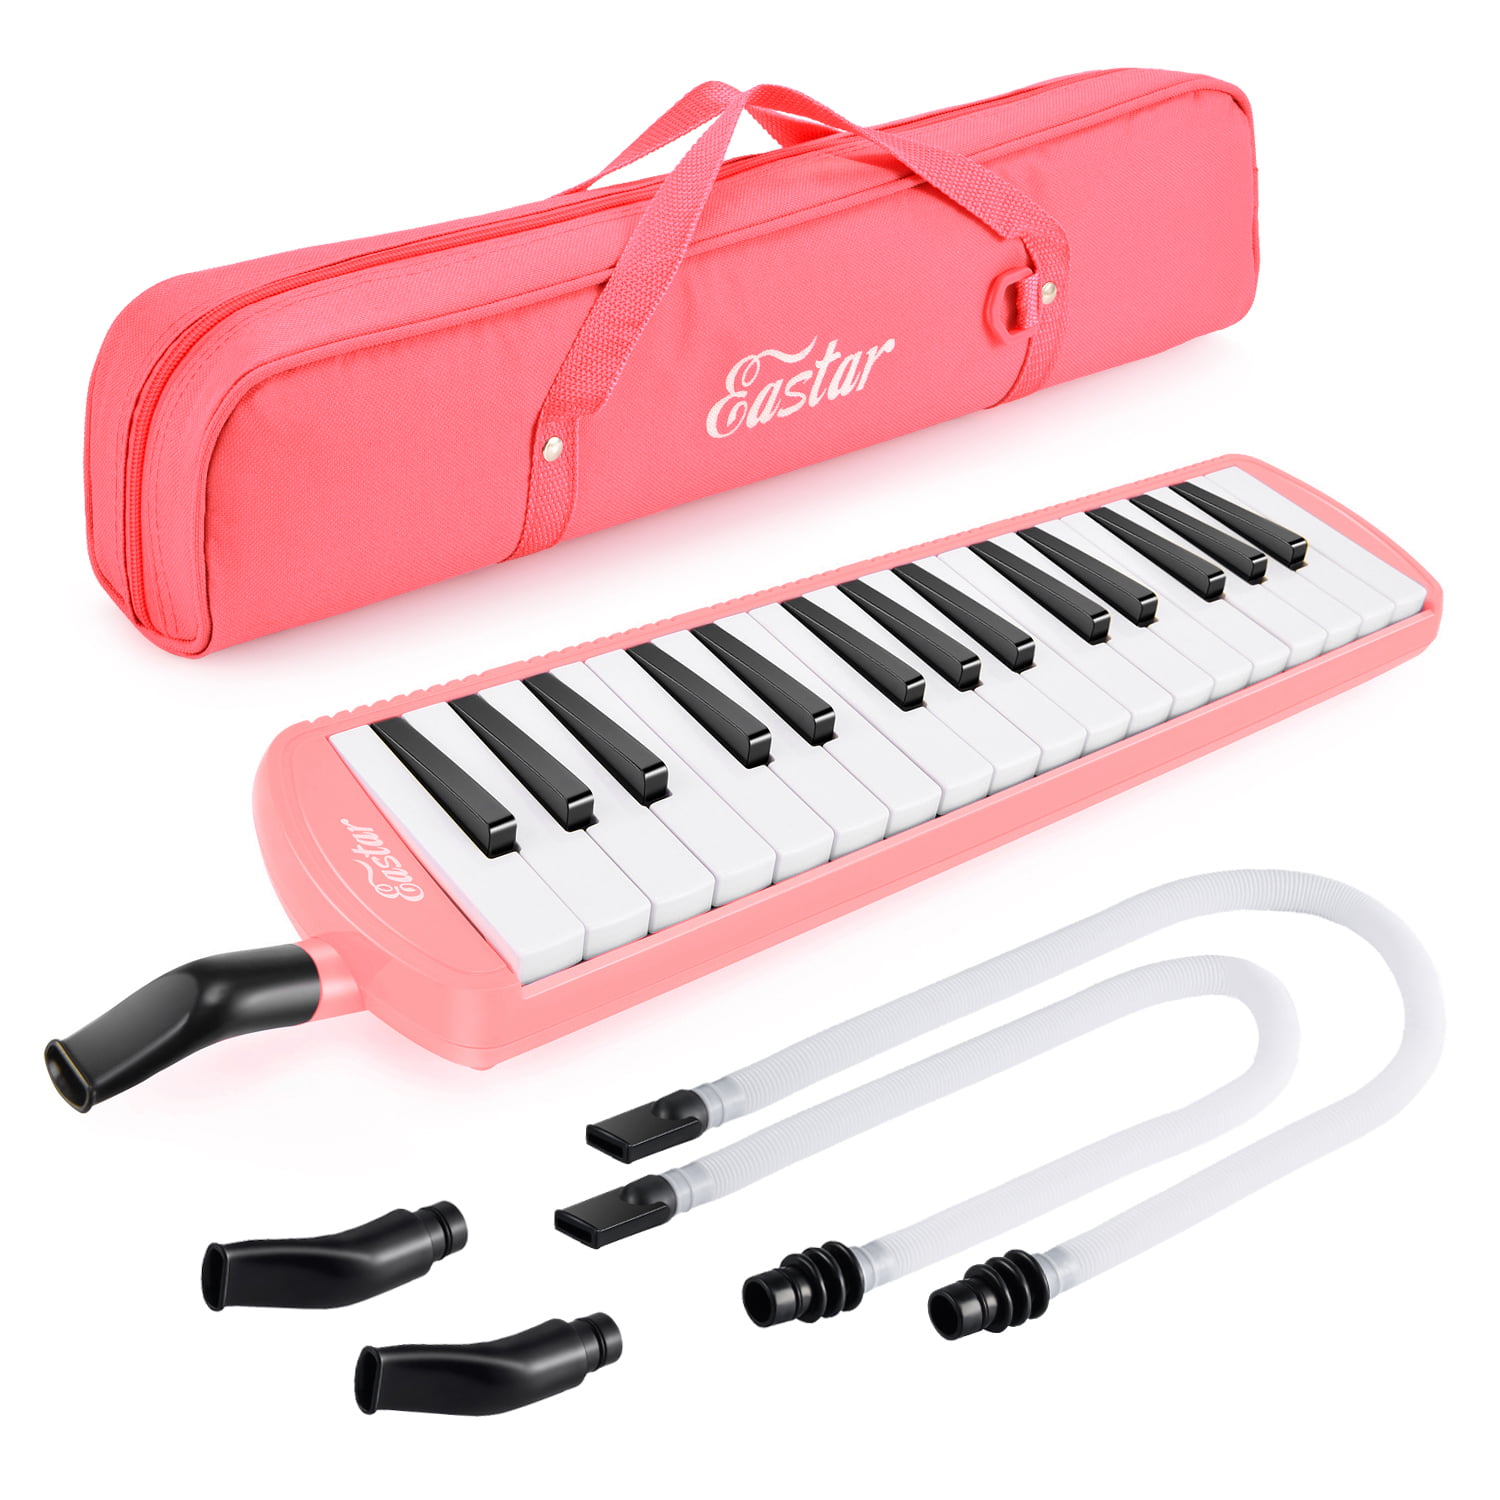 EastRock 37 Key Melodica Instrument Keyboard Soprano Piano Style with Mouthpiece Tube Sets and Carrying Bag for Kids Beginners Adults Gift Pink 